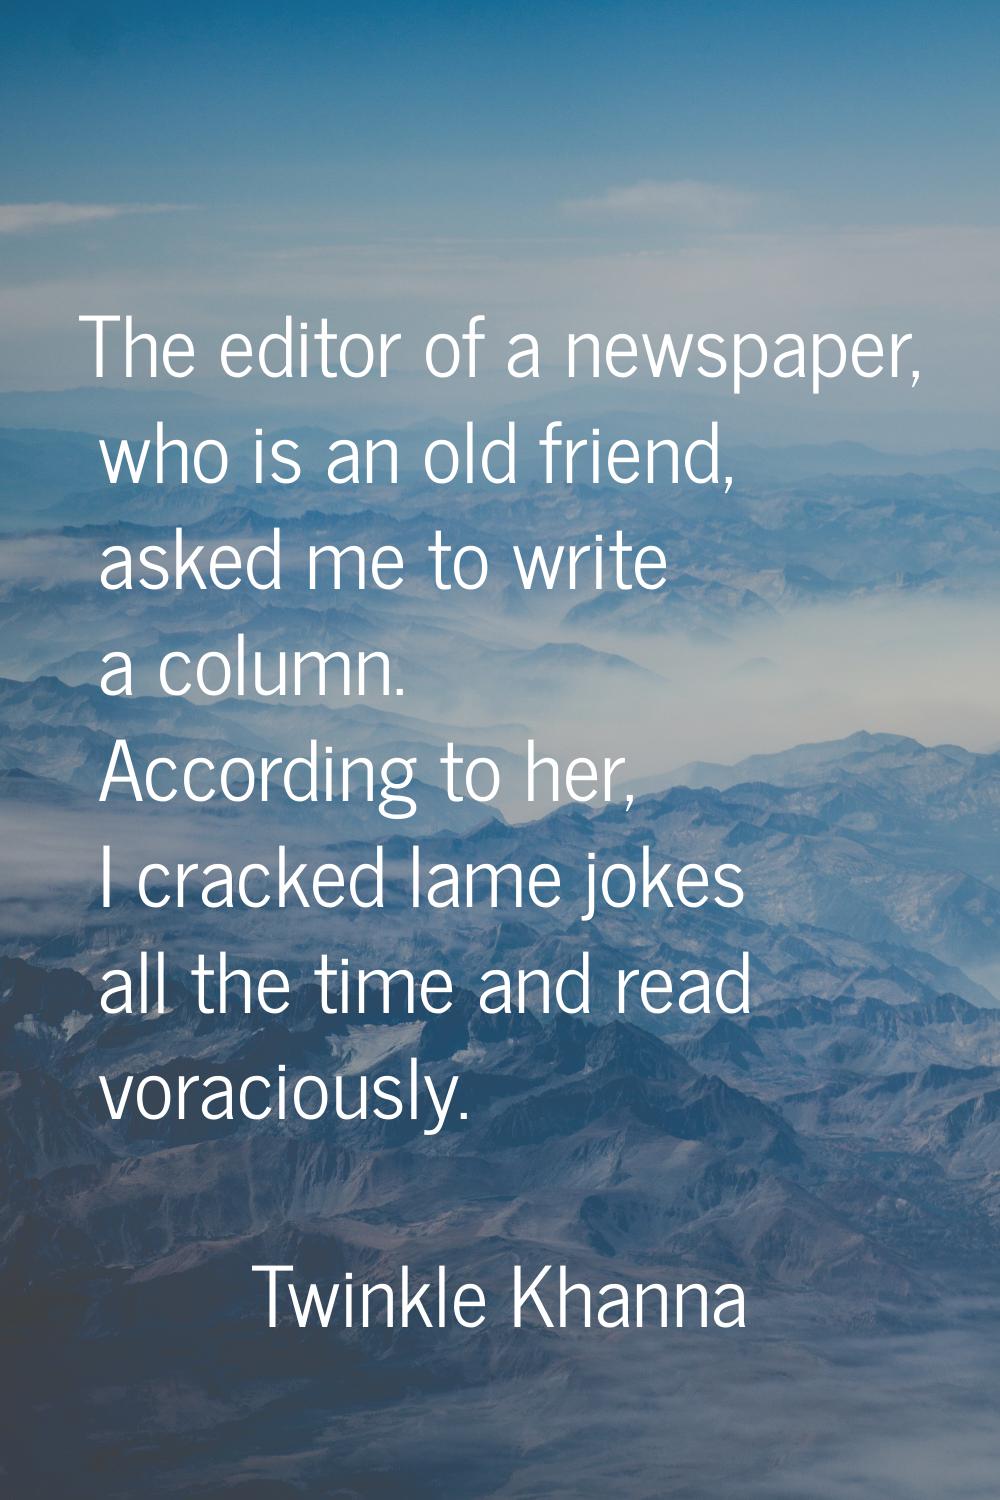 The editor of a newspaper, who is an old friend, asked me to write a column. According to her, I cr